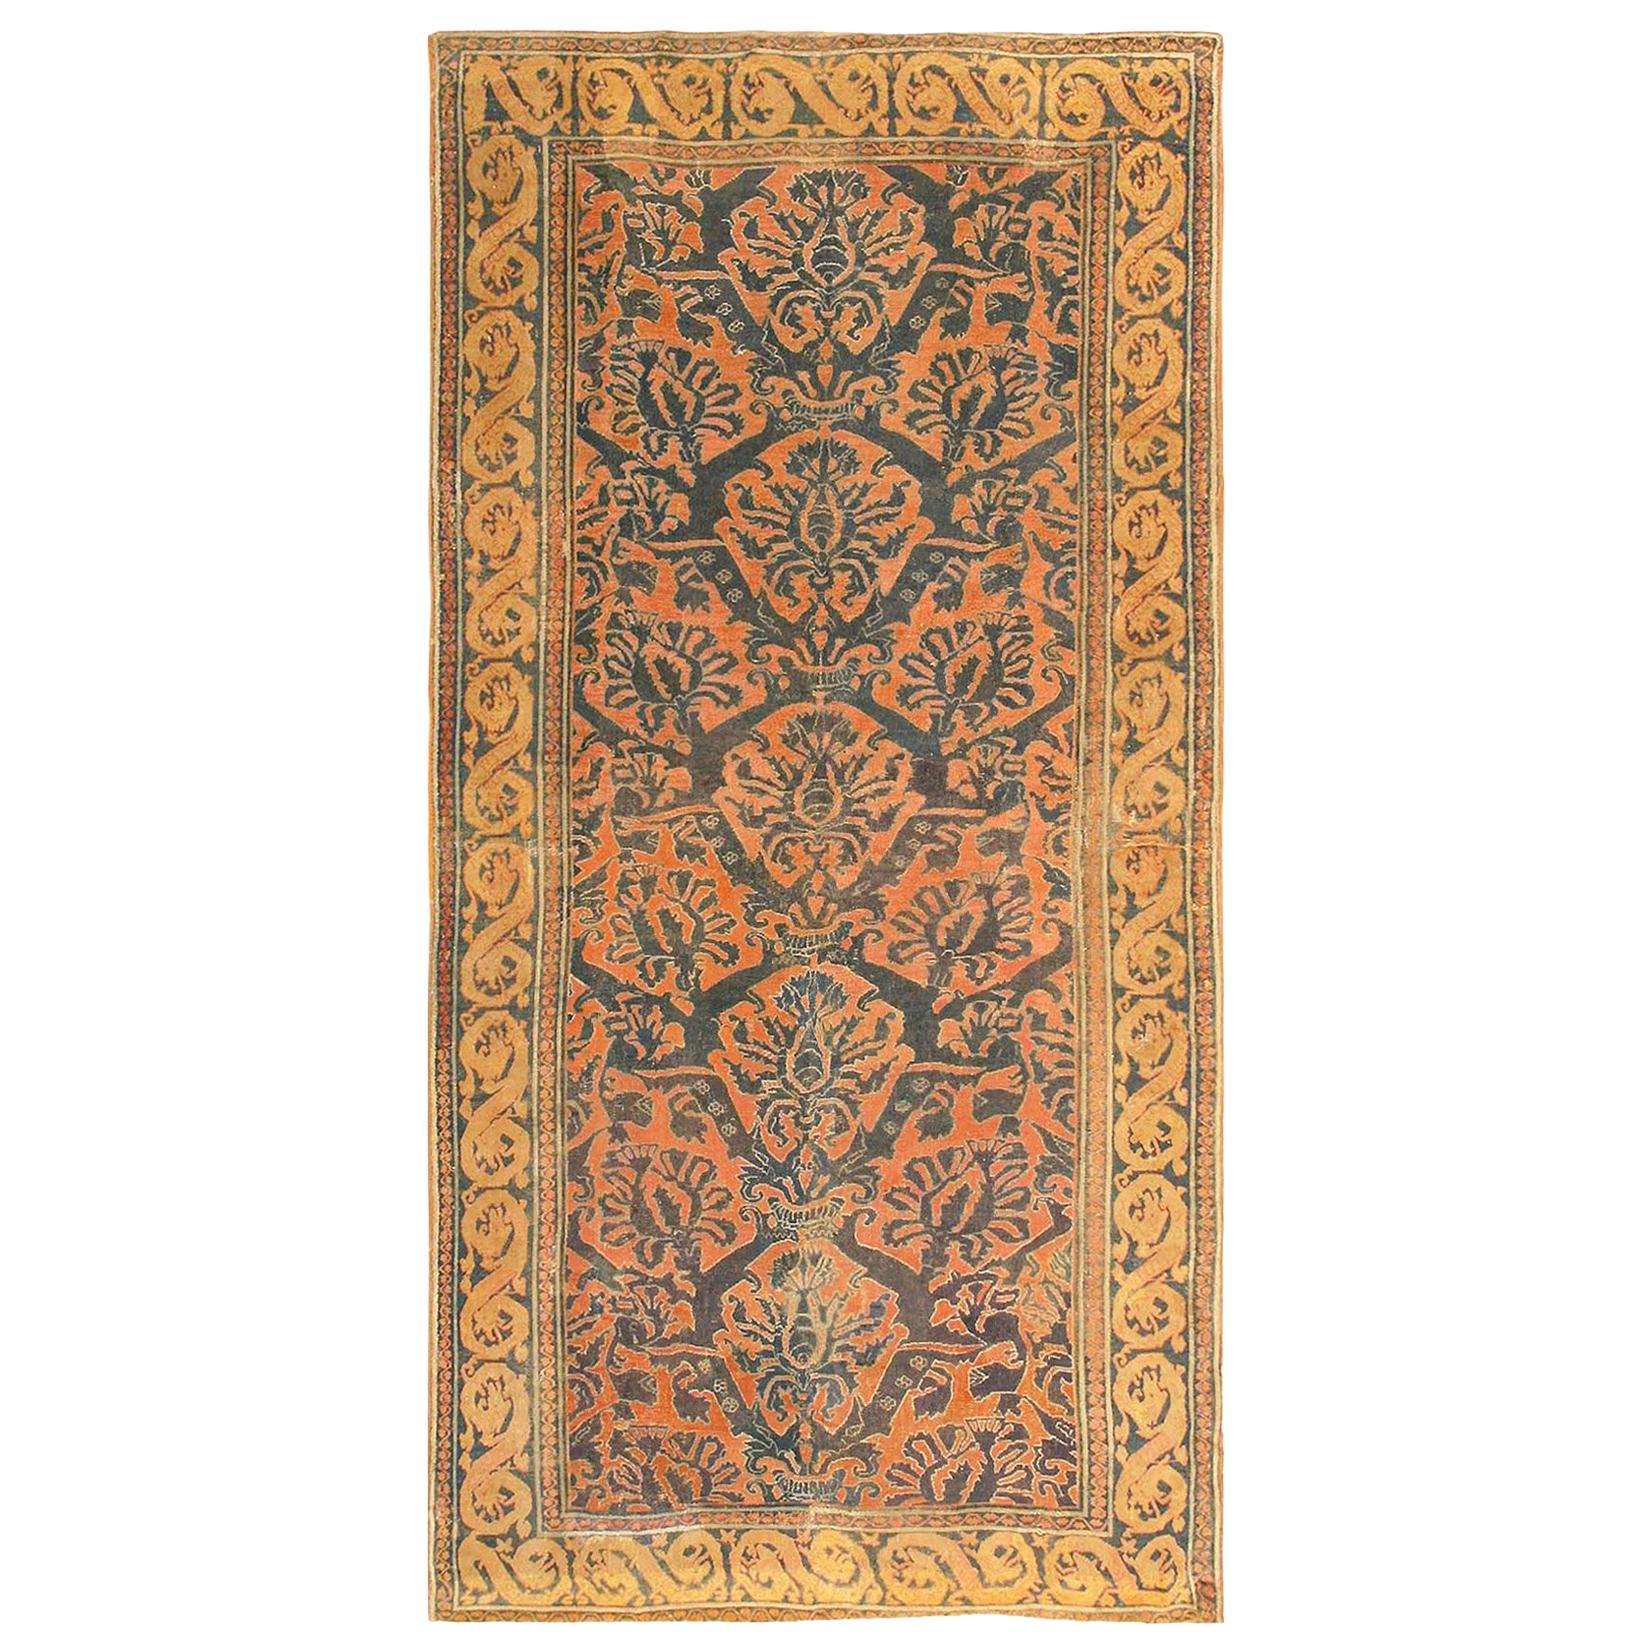 Nazmiyal Antique 16th Century Alcaraz Oriental Rug. Size: 5 ft x 10 ft 2 in 